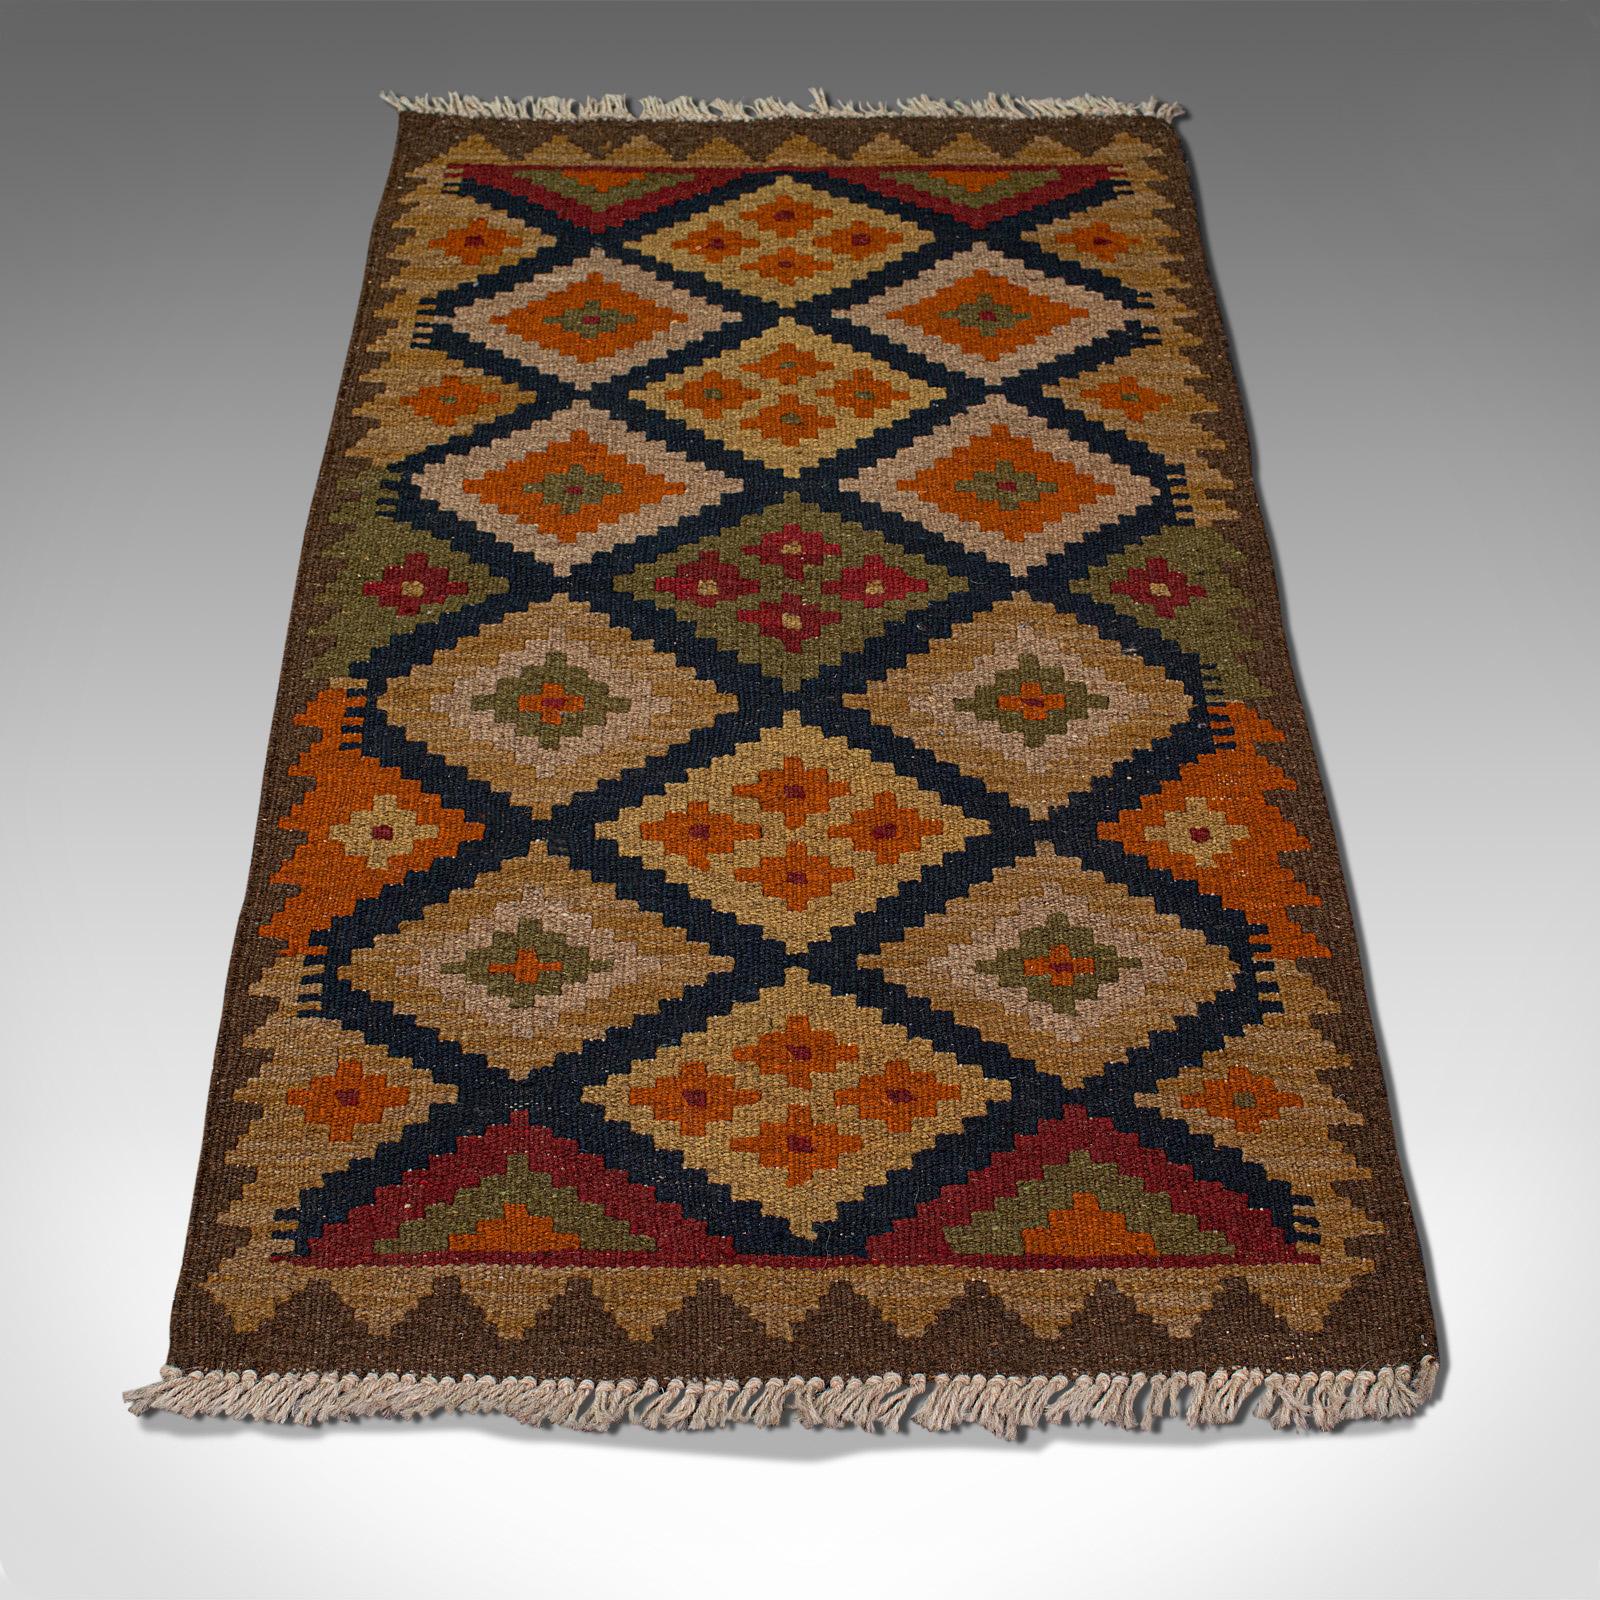 This is a small vintage Maimana Kilim rug. A Middle Eastern, woven prayer mat, dating to the mid 20th century, circa 1960.

Of prayer mat or doorway size at 56cm (22'') x 104.5cm (41.25'')
Displaying a desirable aged patina
Woven without pile,